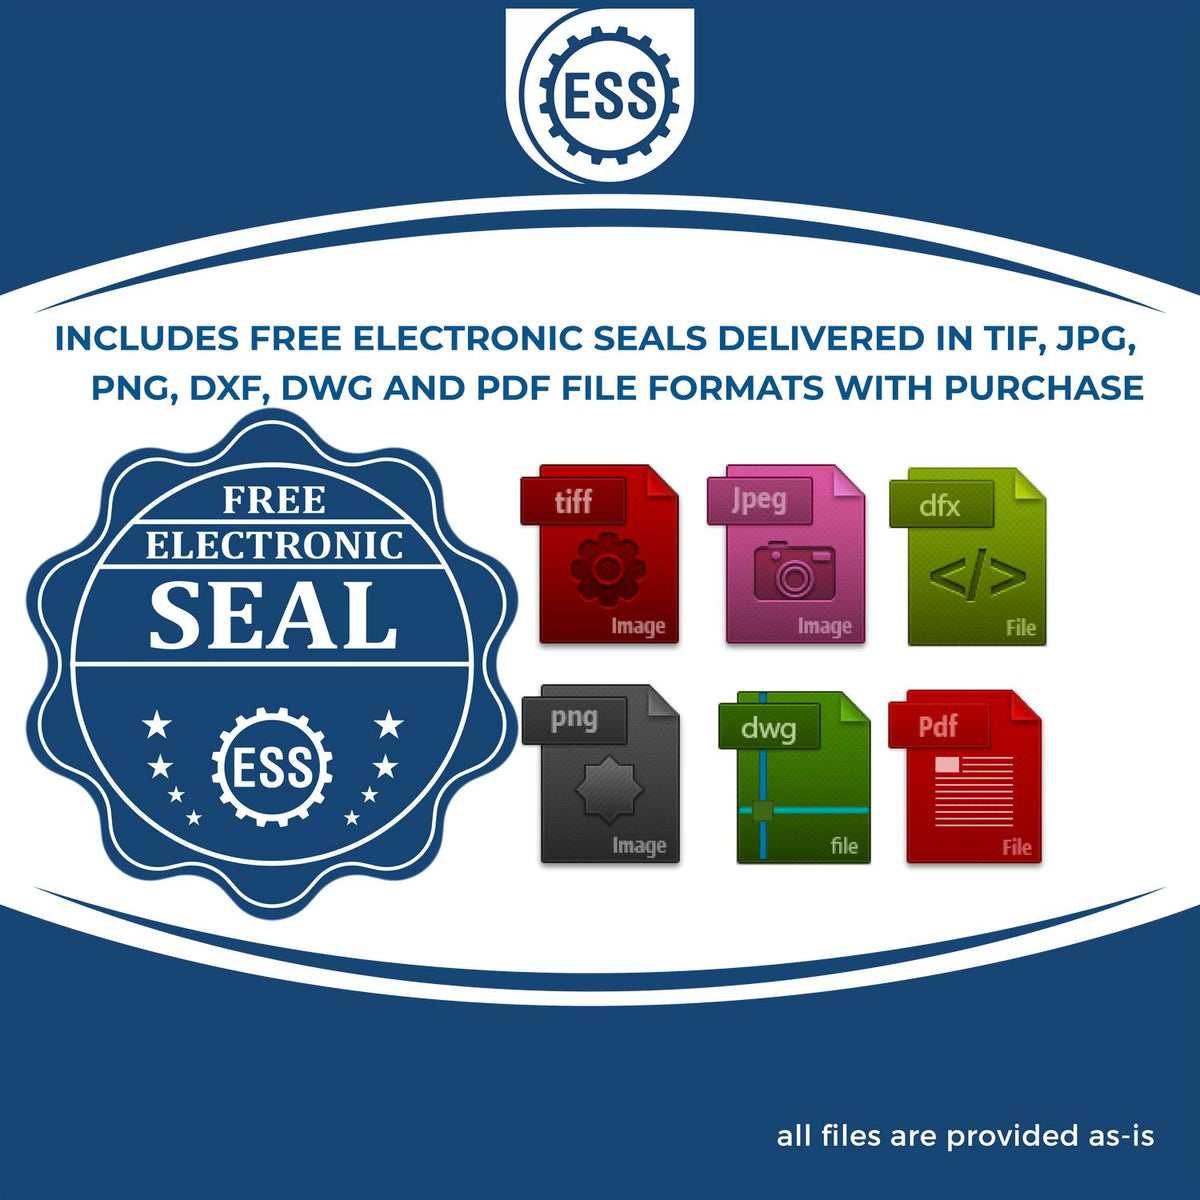 An infographic for the free electronic seal for the Slim Pre-Inked Wisconsin Professional Engineer Seal Stamp illustrating the different file type icons such as DXF, DWG, TIF, JPG and PNG.